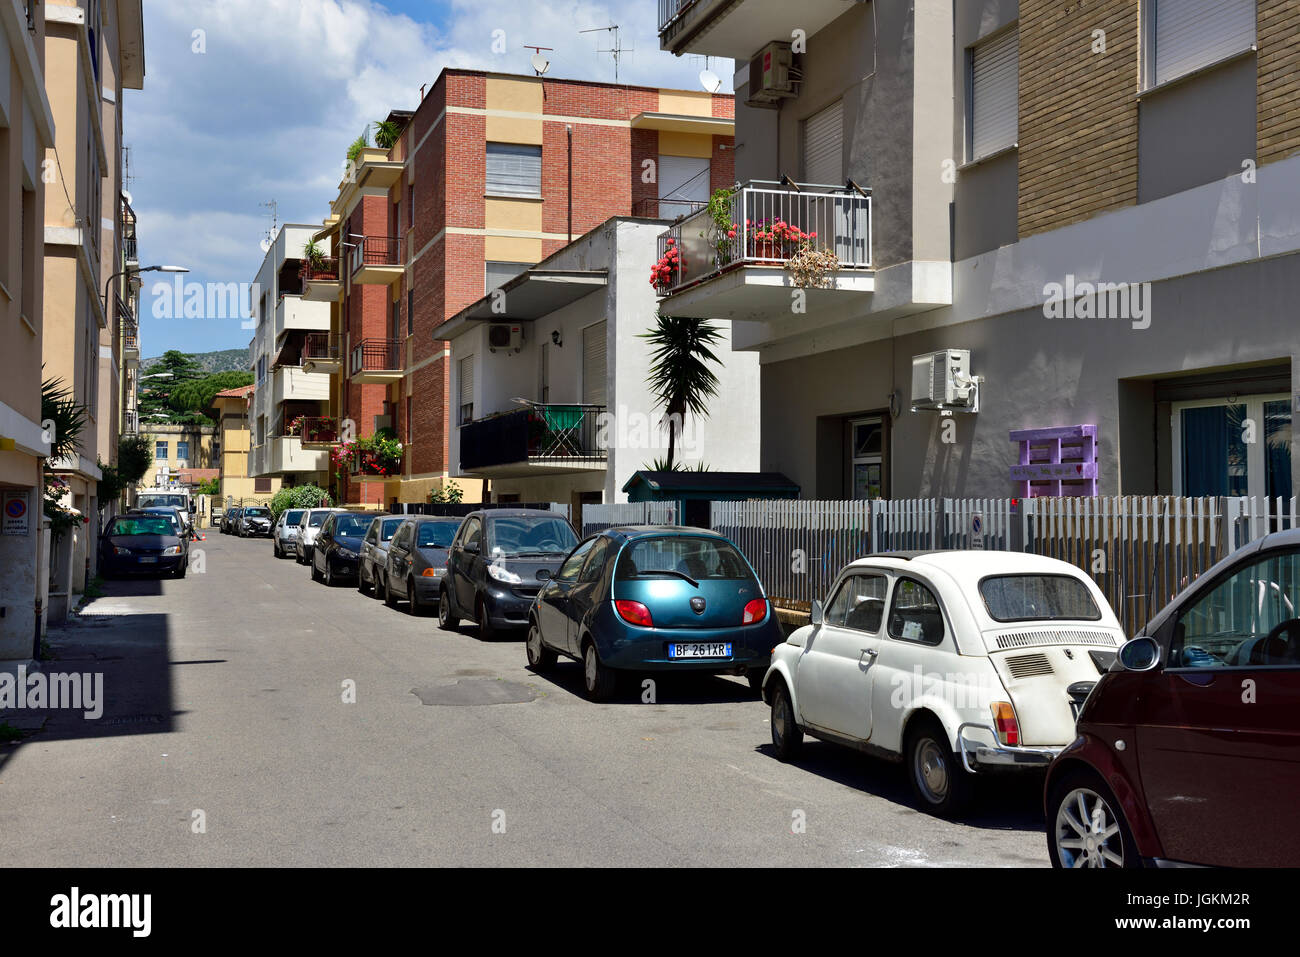 Typical ordinary apartments / flats along street in central Terracina, Italy Stock Photo